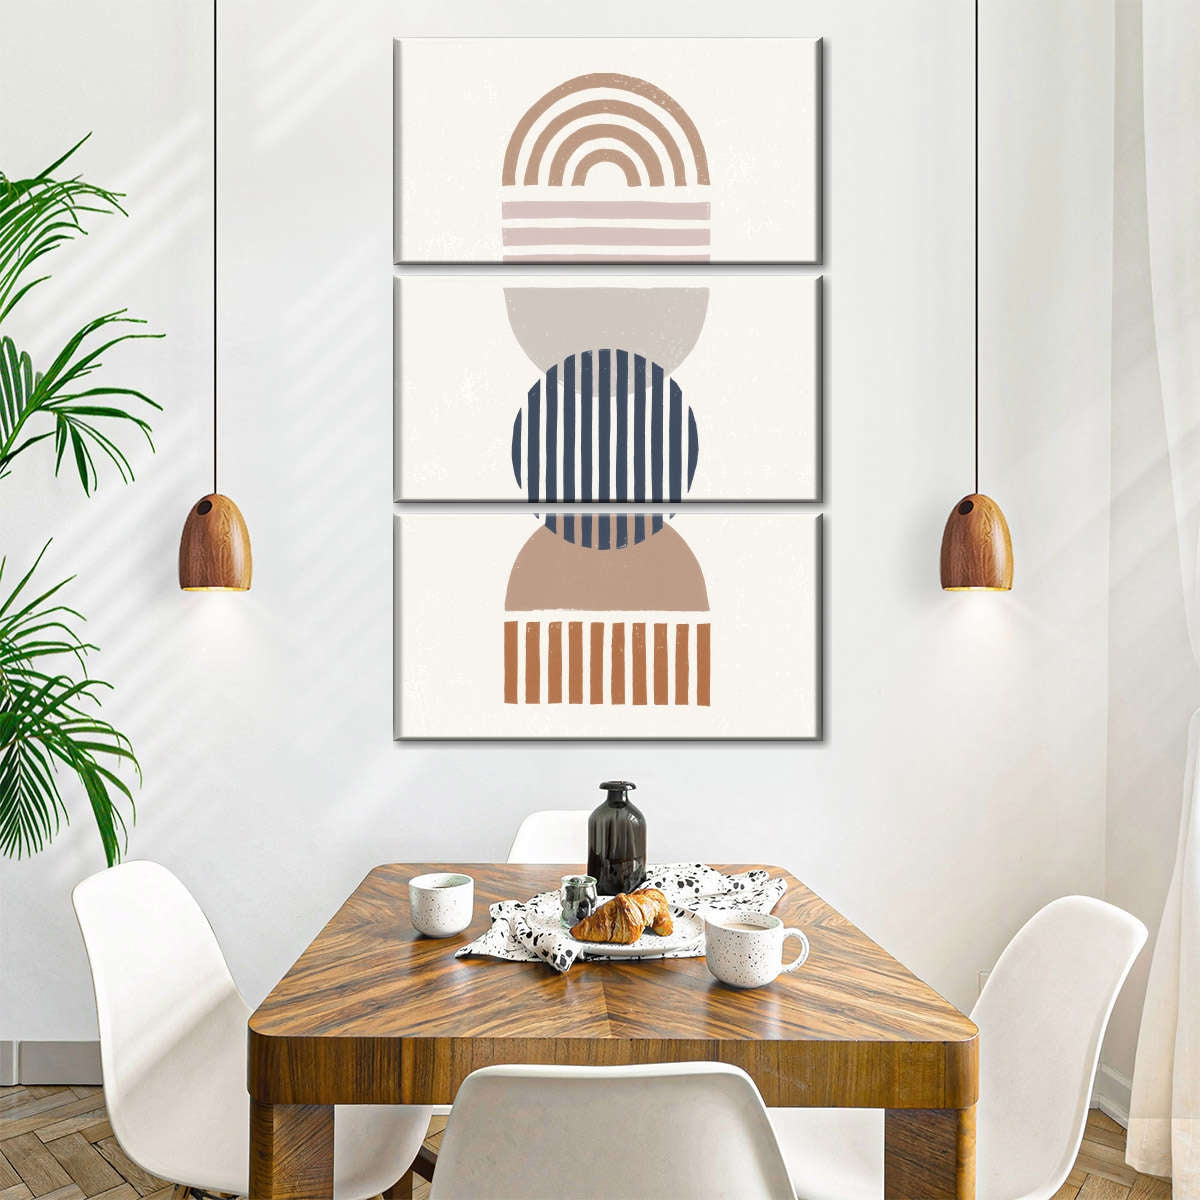 Redecorate with These Dining Room Wall Art Ideas